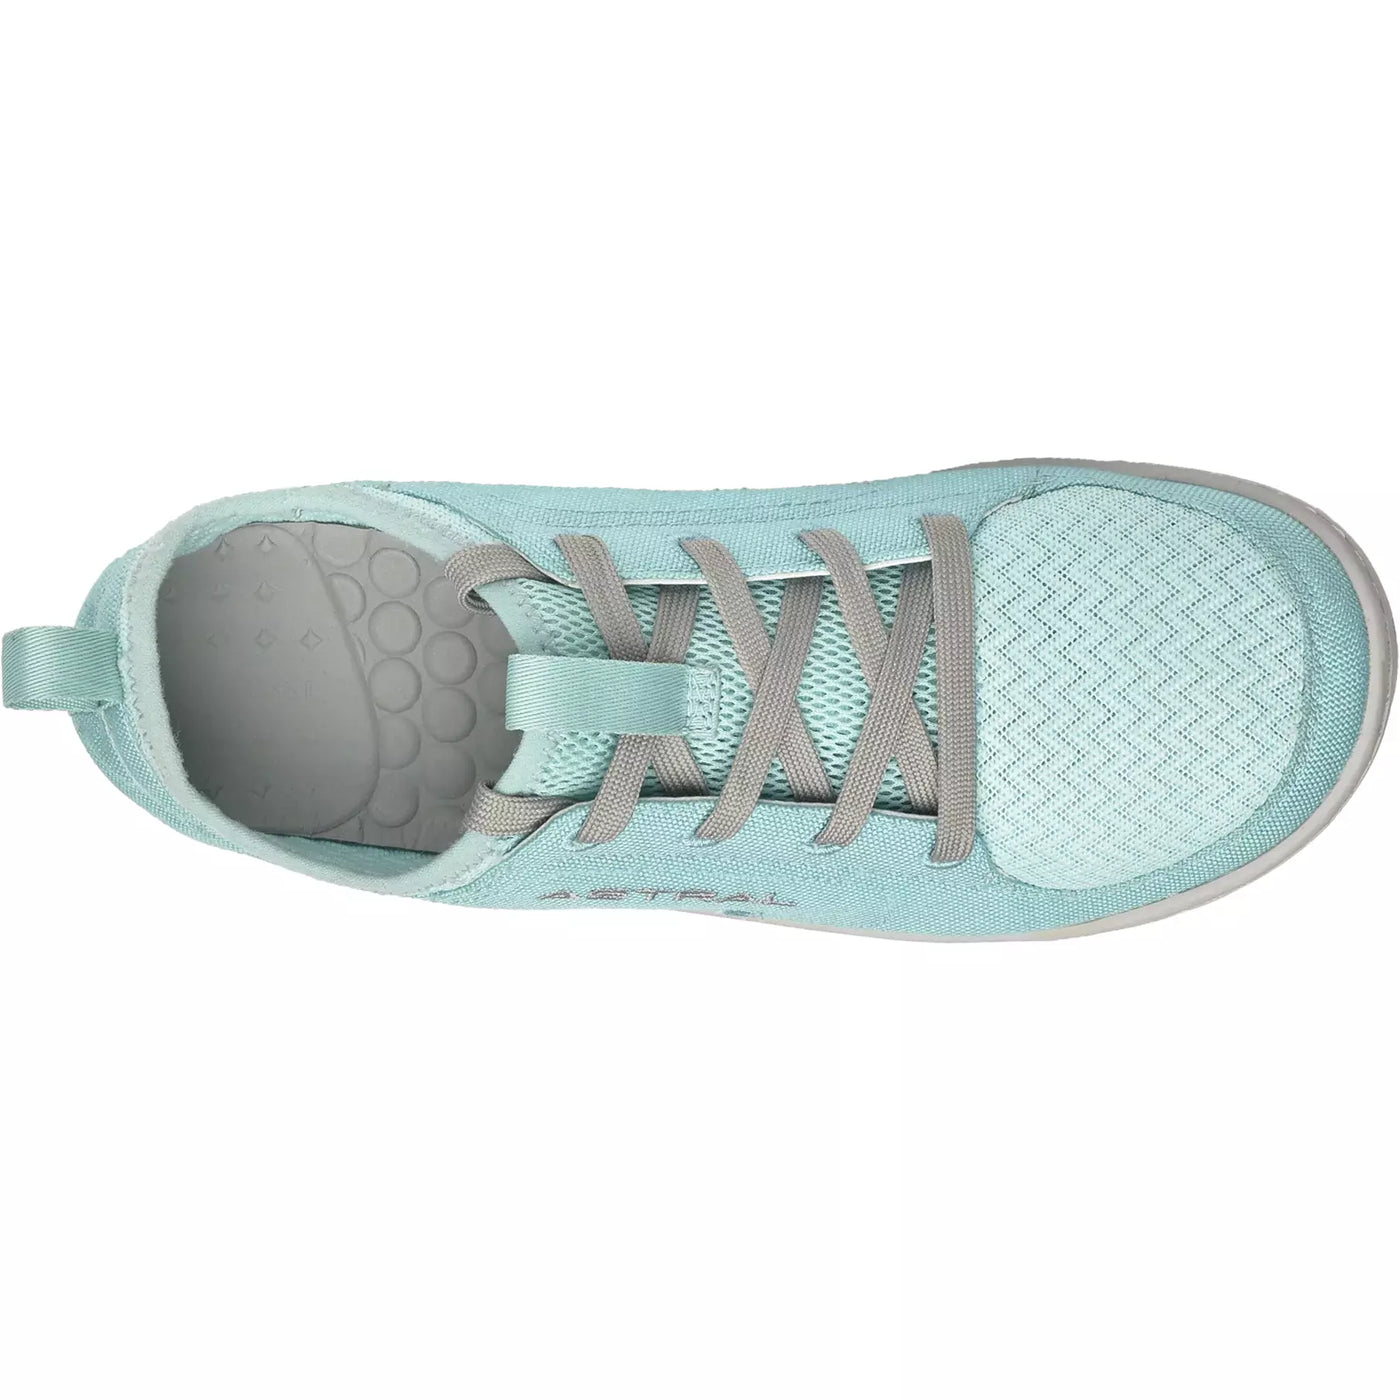 Astral Loyak Women's Water Shoes